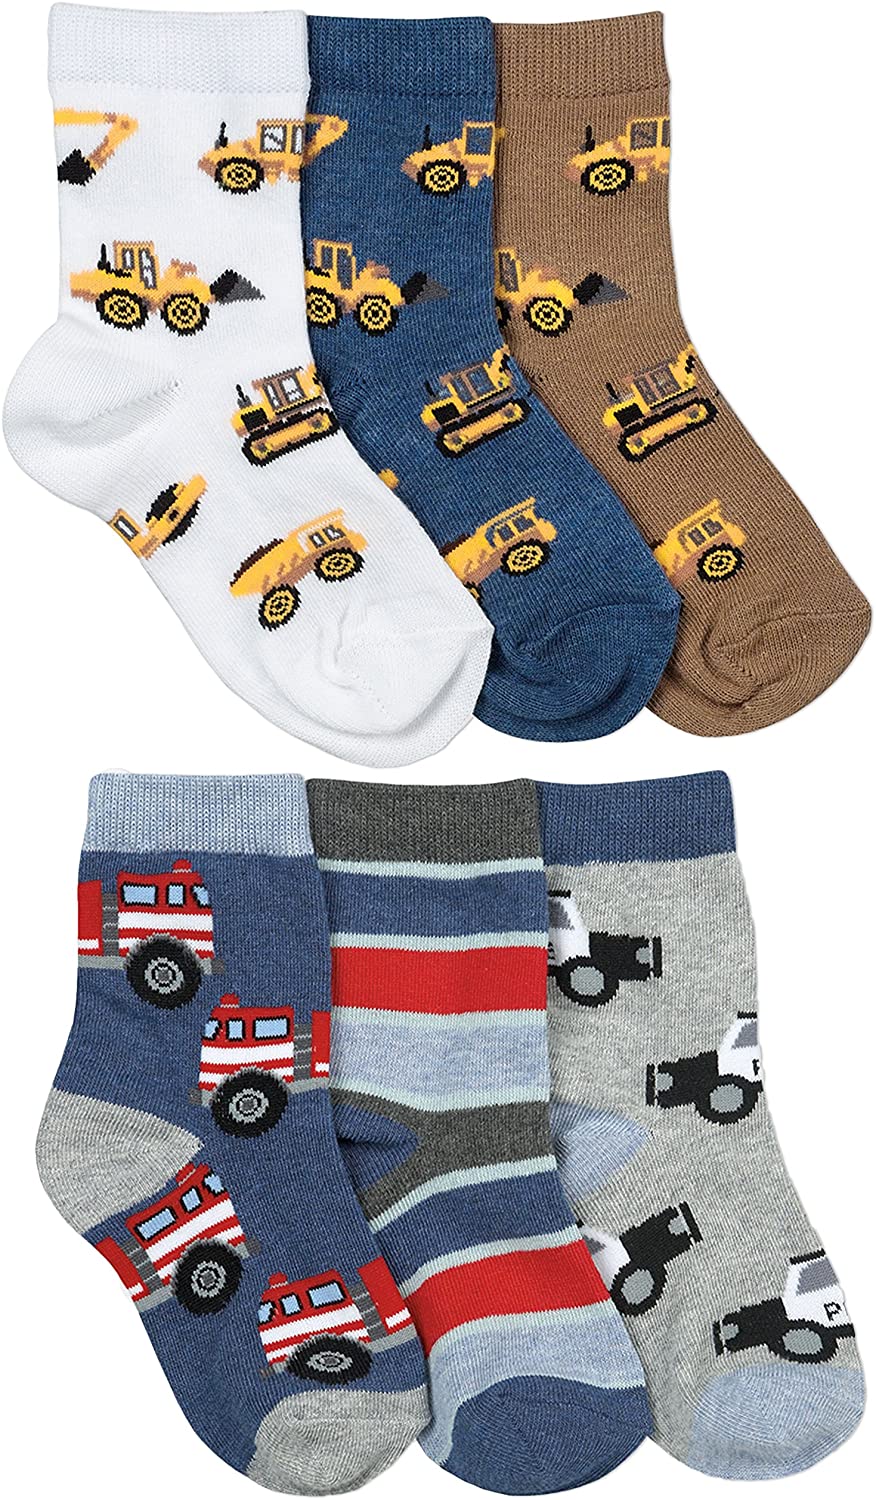 Jefferies Socks Boys Socks, 6 Pack Construction Equipment Rescue Vehicle Fashion Pattern Crew Sizes Toddler and XS - S - image 1 of 2